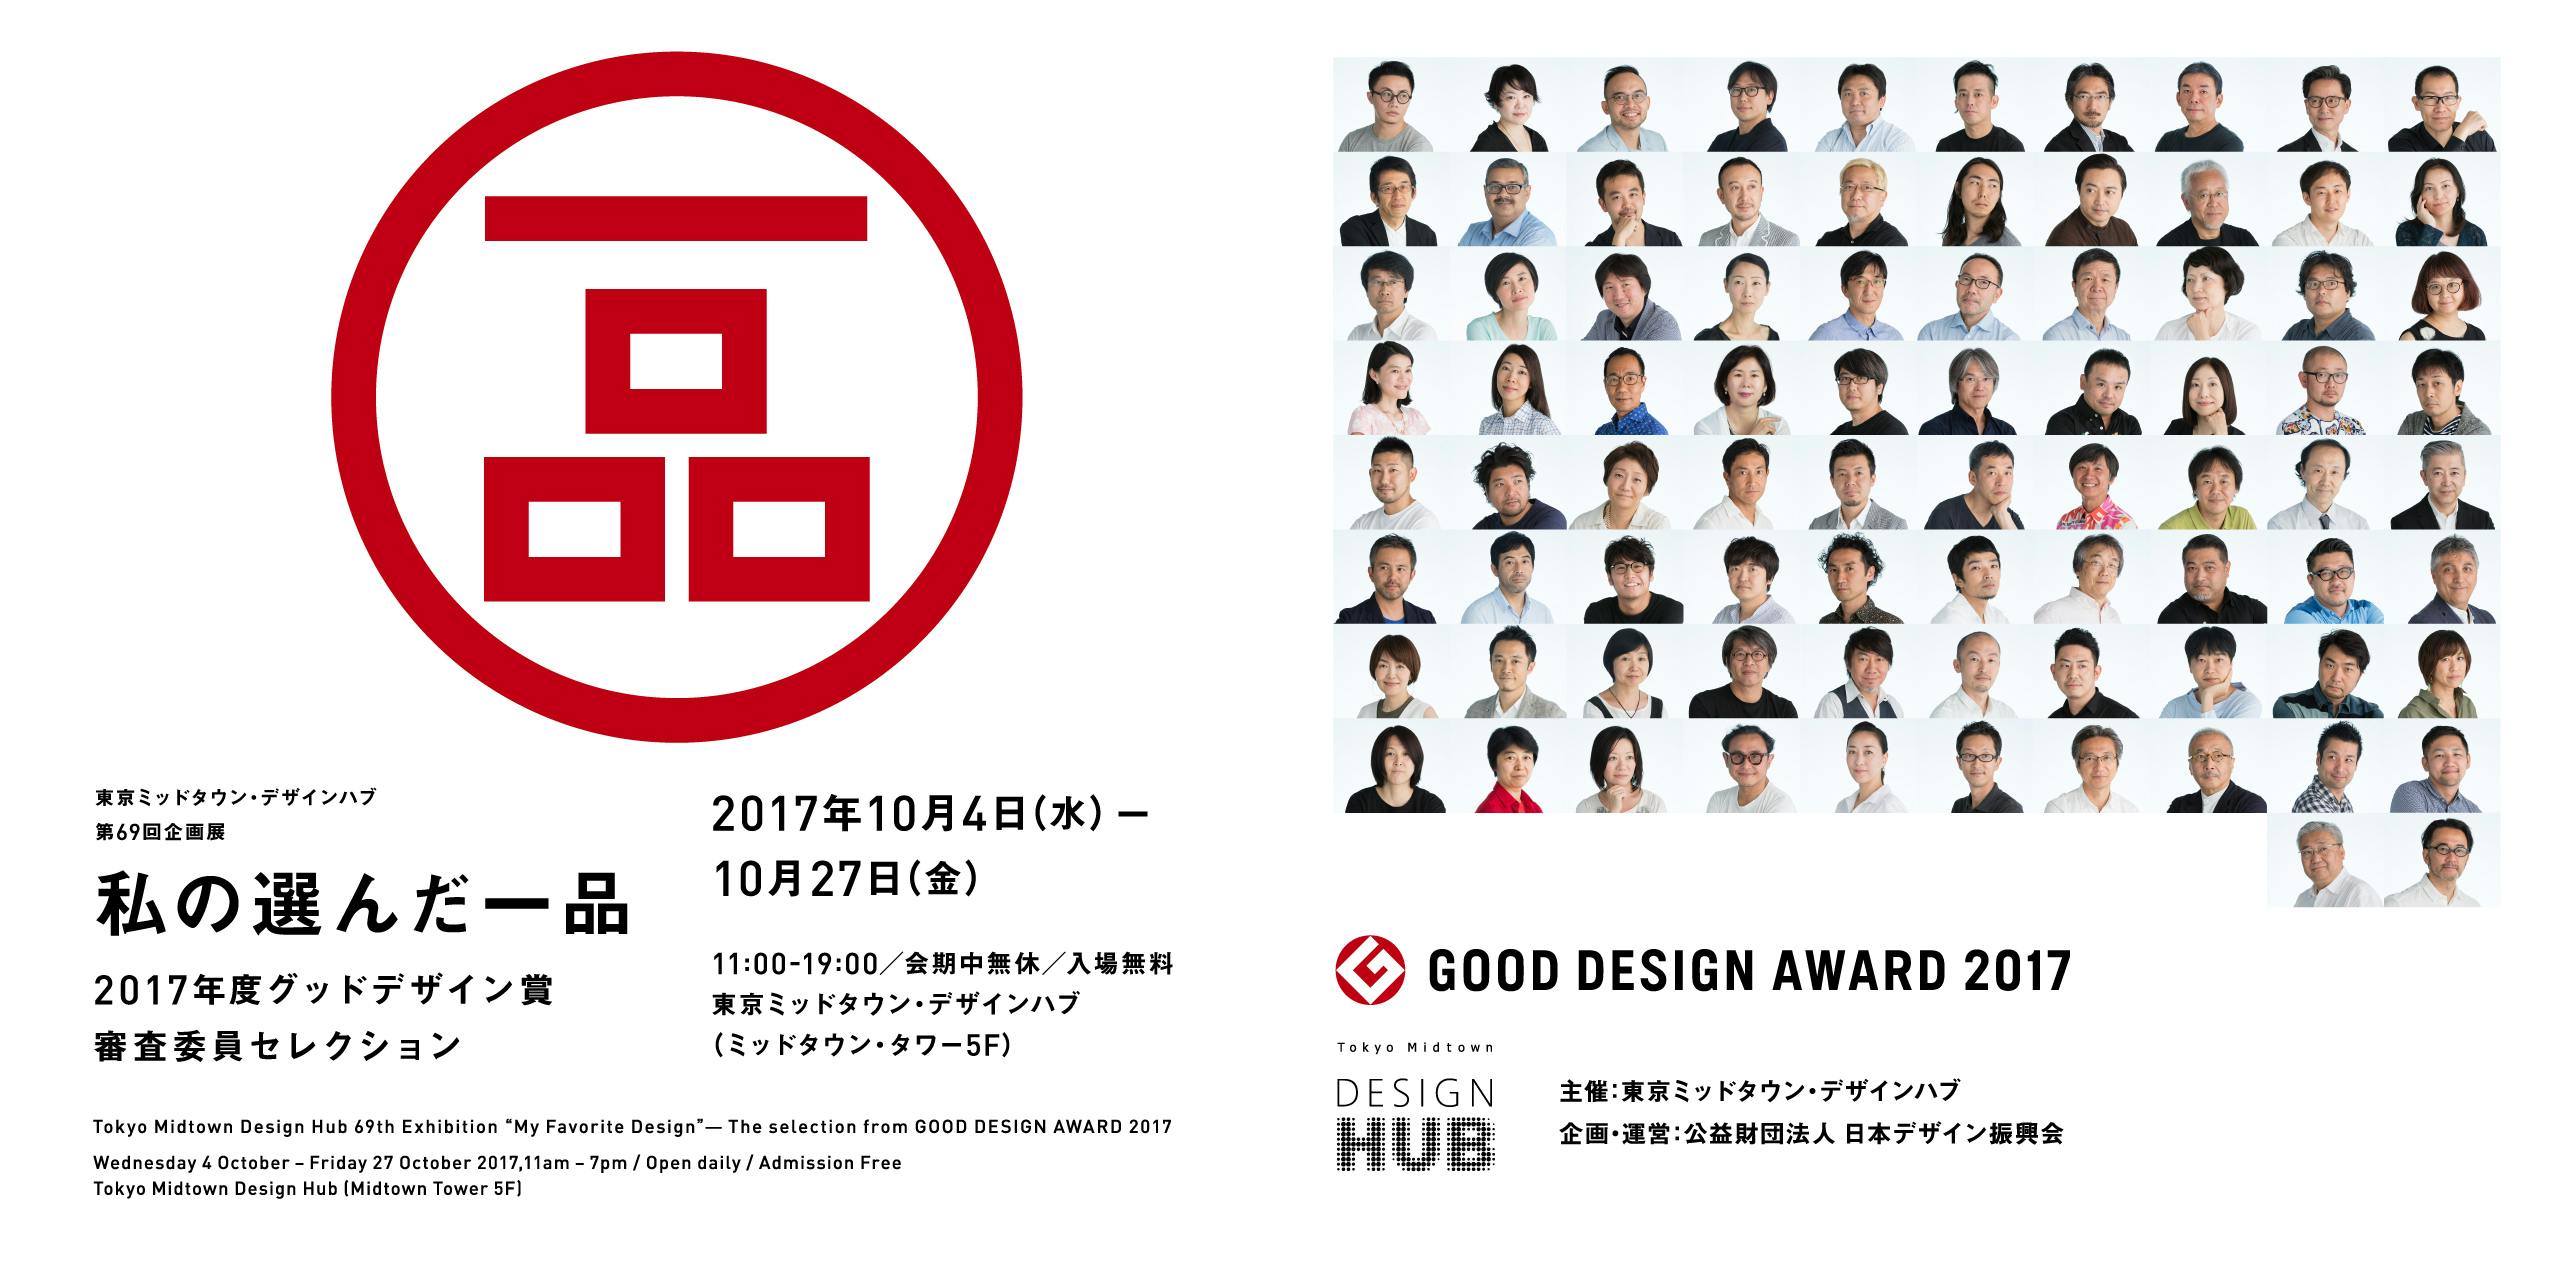 "My Favorite Design" - The selection from GOOD DESIGN AWARD 2017